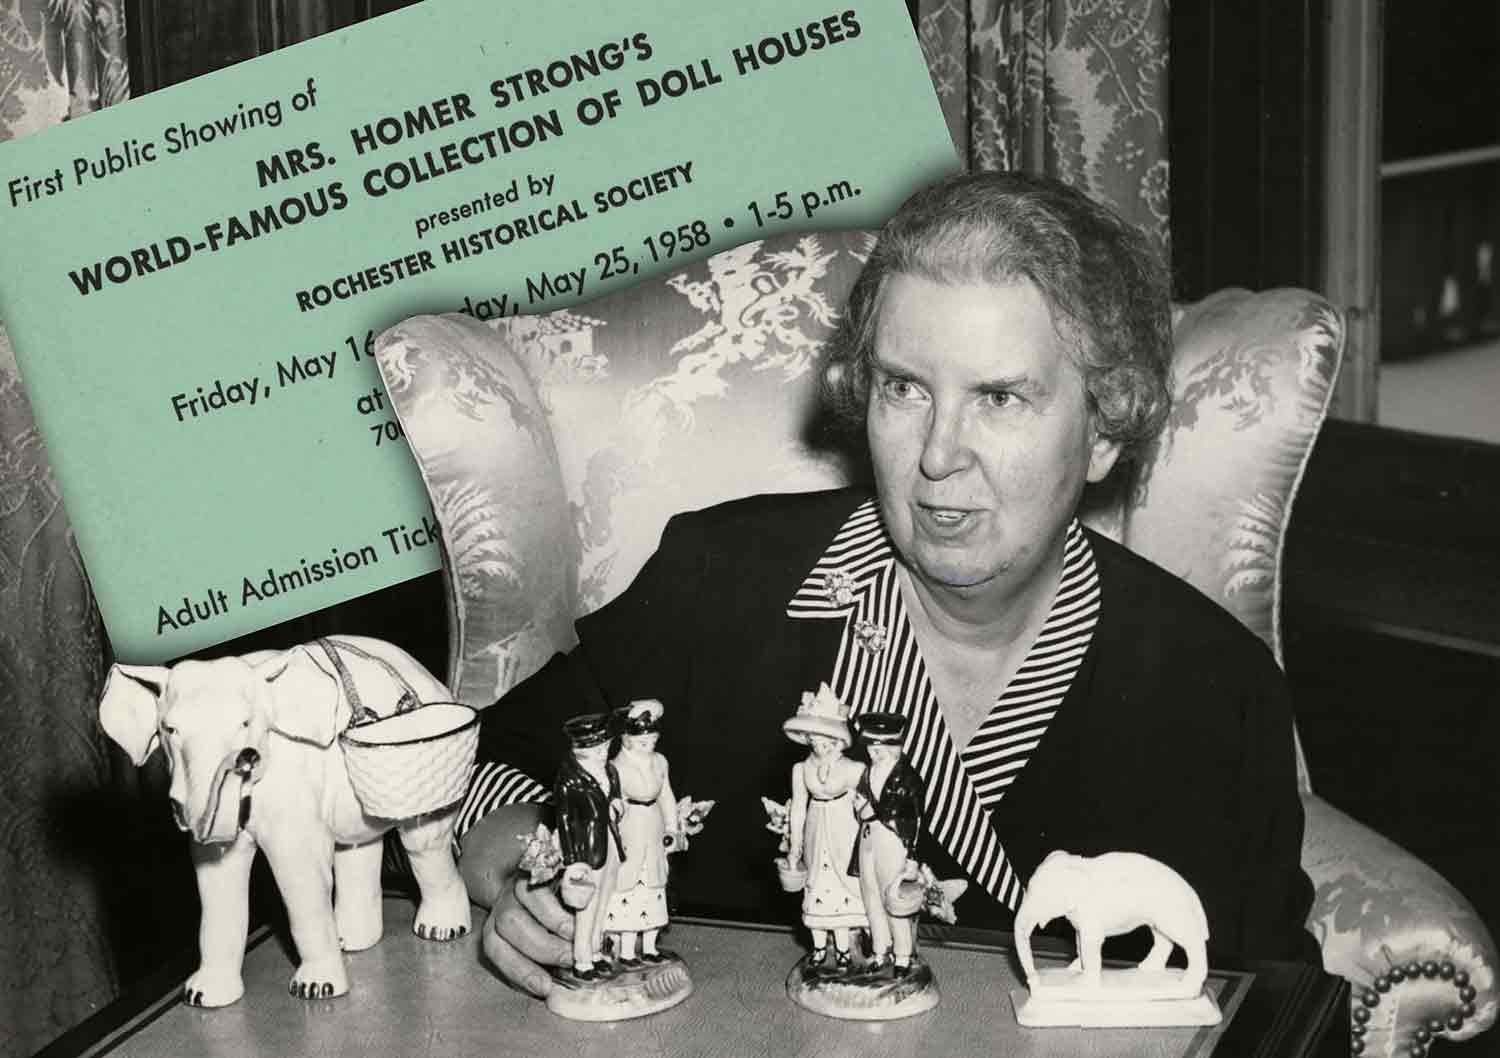 A woman sits in an armchair with figurines on a table in front of her and a card reading Mas. Homer Strong’s World Famous Collection of Dollhouses behind her.